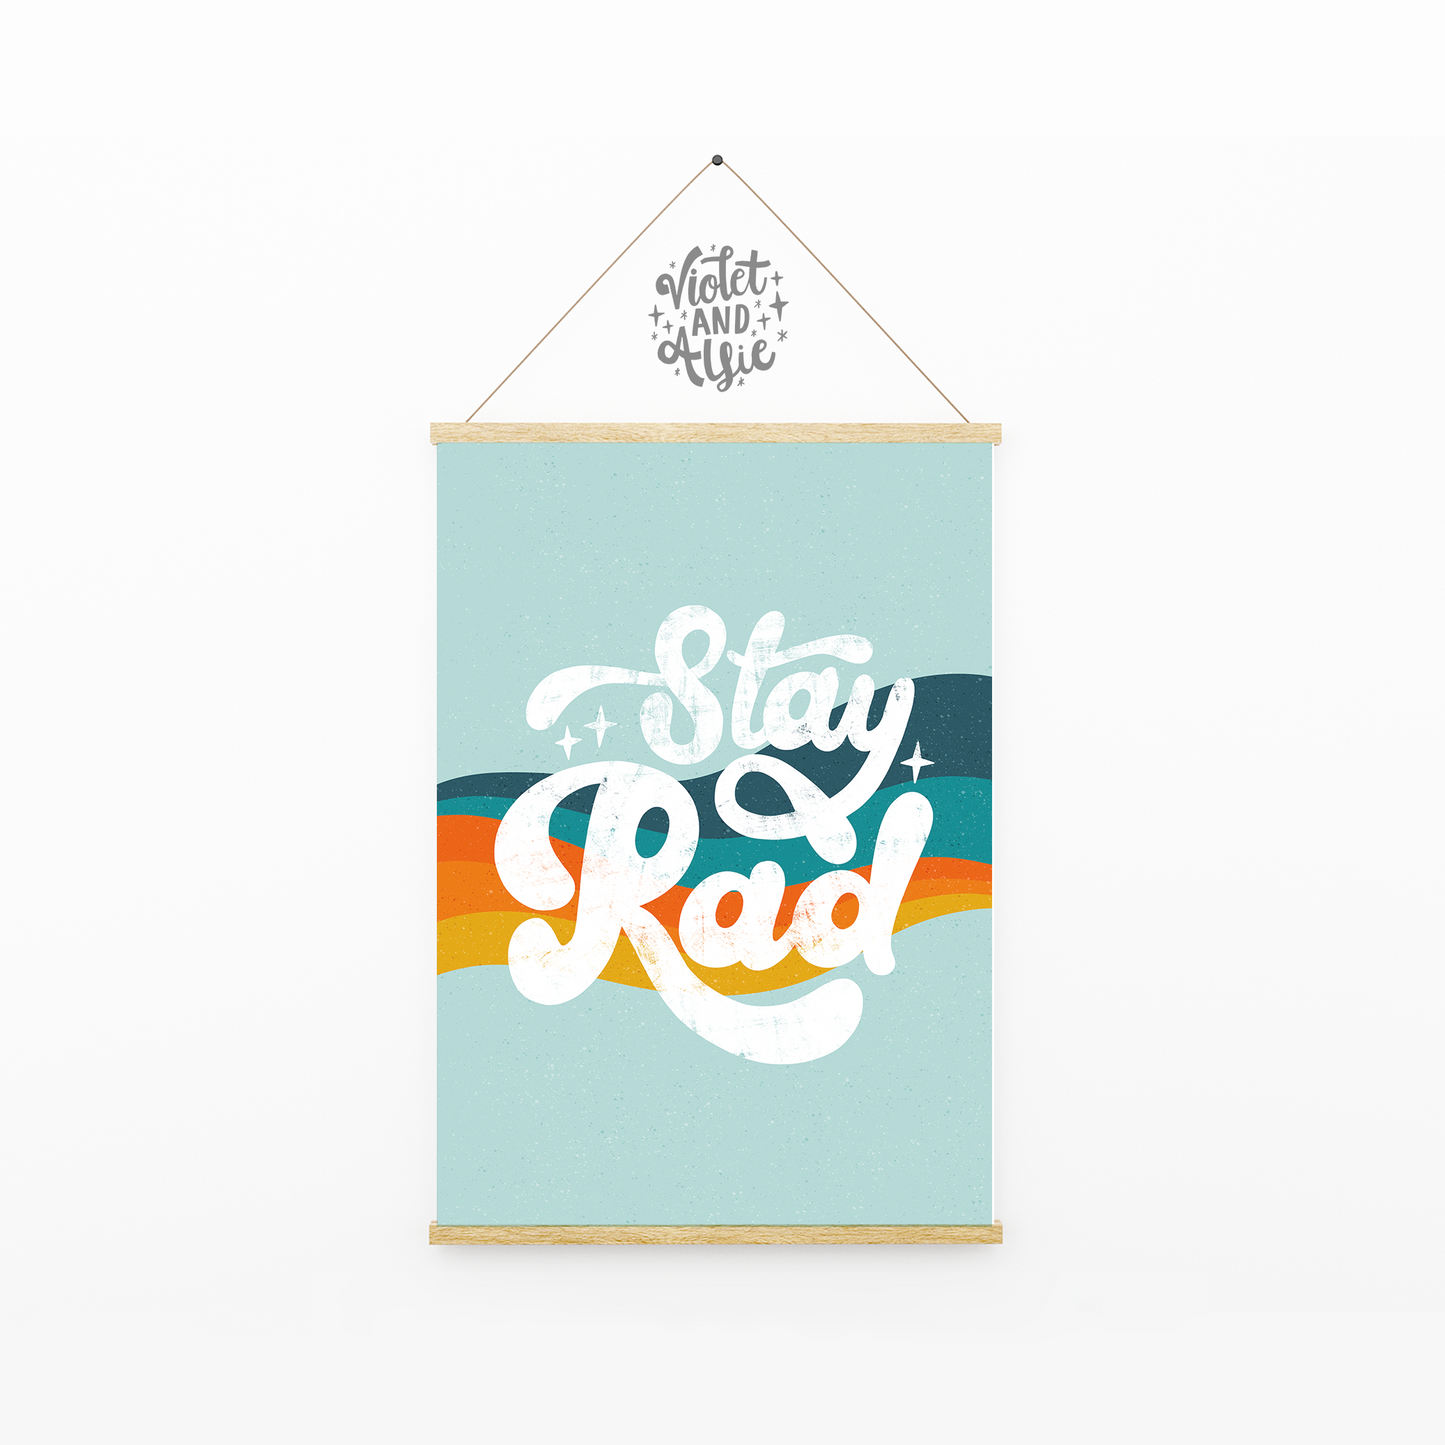 Stay Rad  This retro, seventies inspired wall art features funky hand lettered positivity and a gorgeous on-trend rainbow stripe in either a vintage blue and orange mix or pink and blue mix. This bold eye-catching print is perfect for adding to a retro themed bedroom (thank you Stranger Things) or a vibrant gallery wall display.